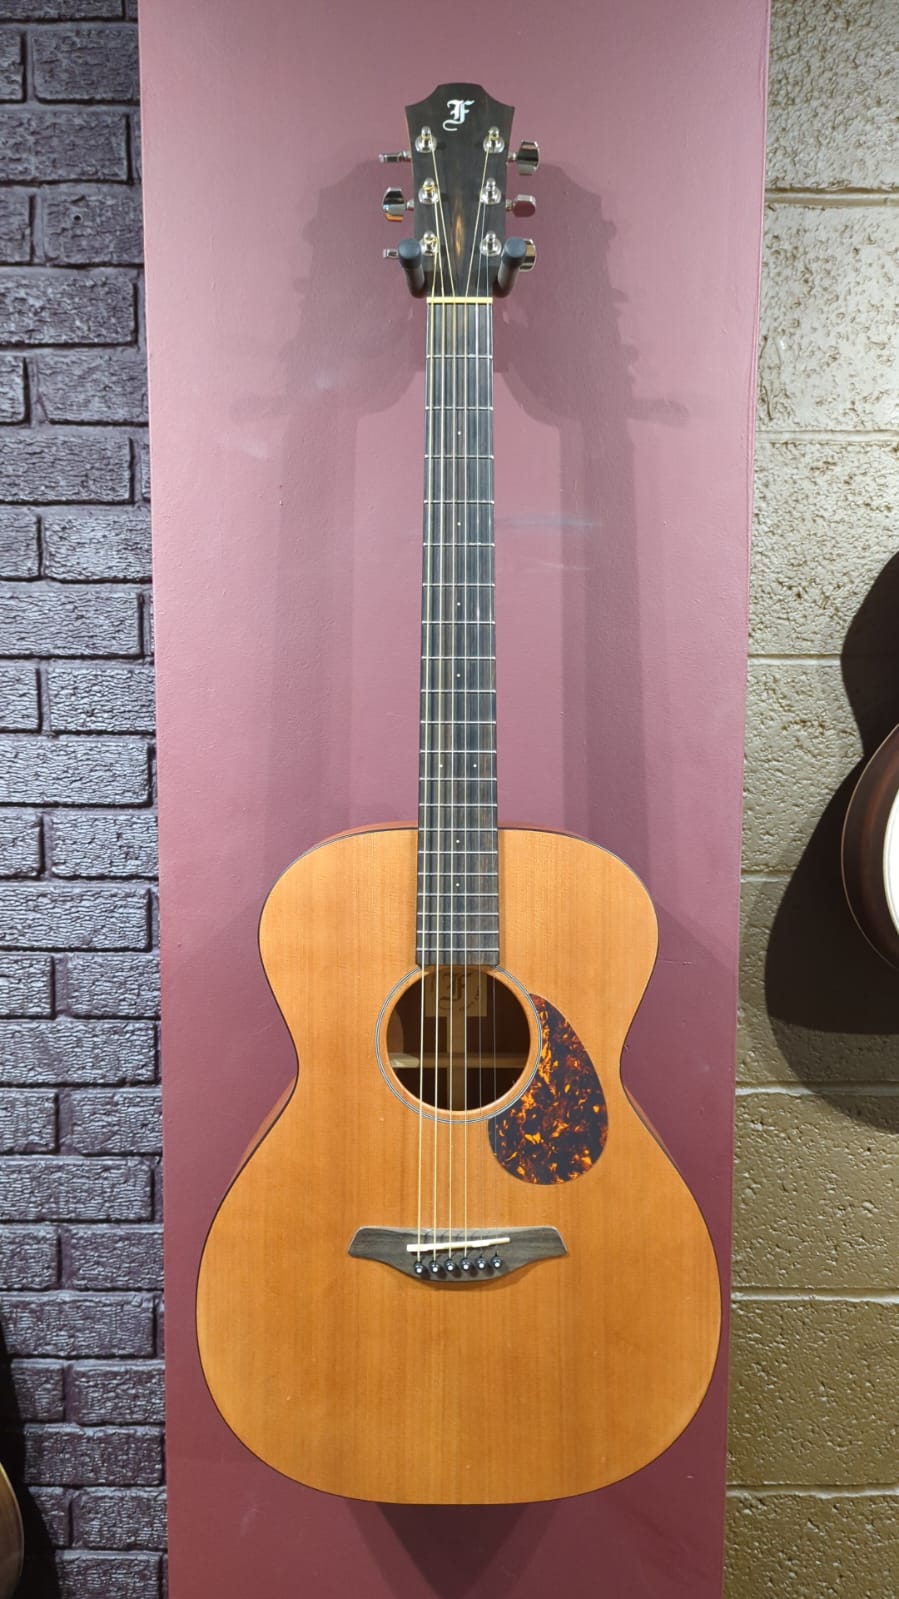 Furch OM 20 CM (Used), Acoustic Guitar for sale at Richards Guitars.